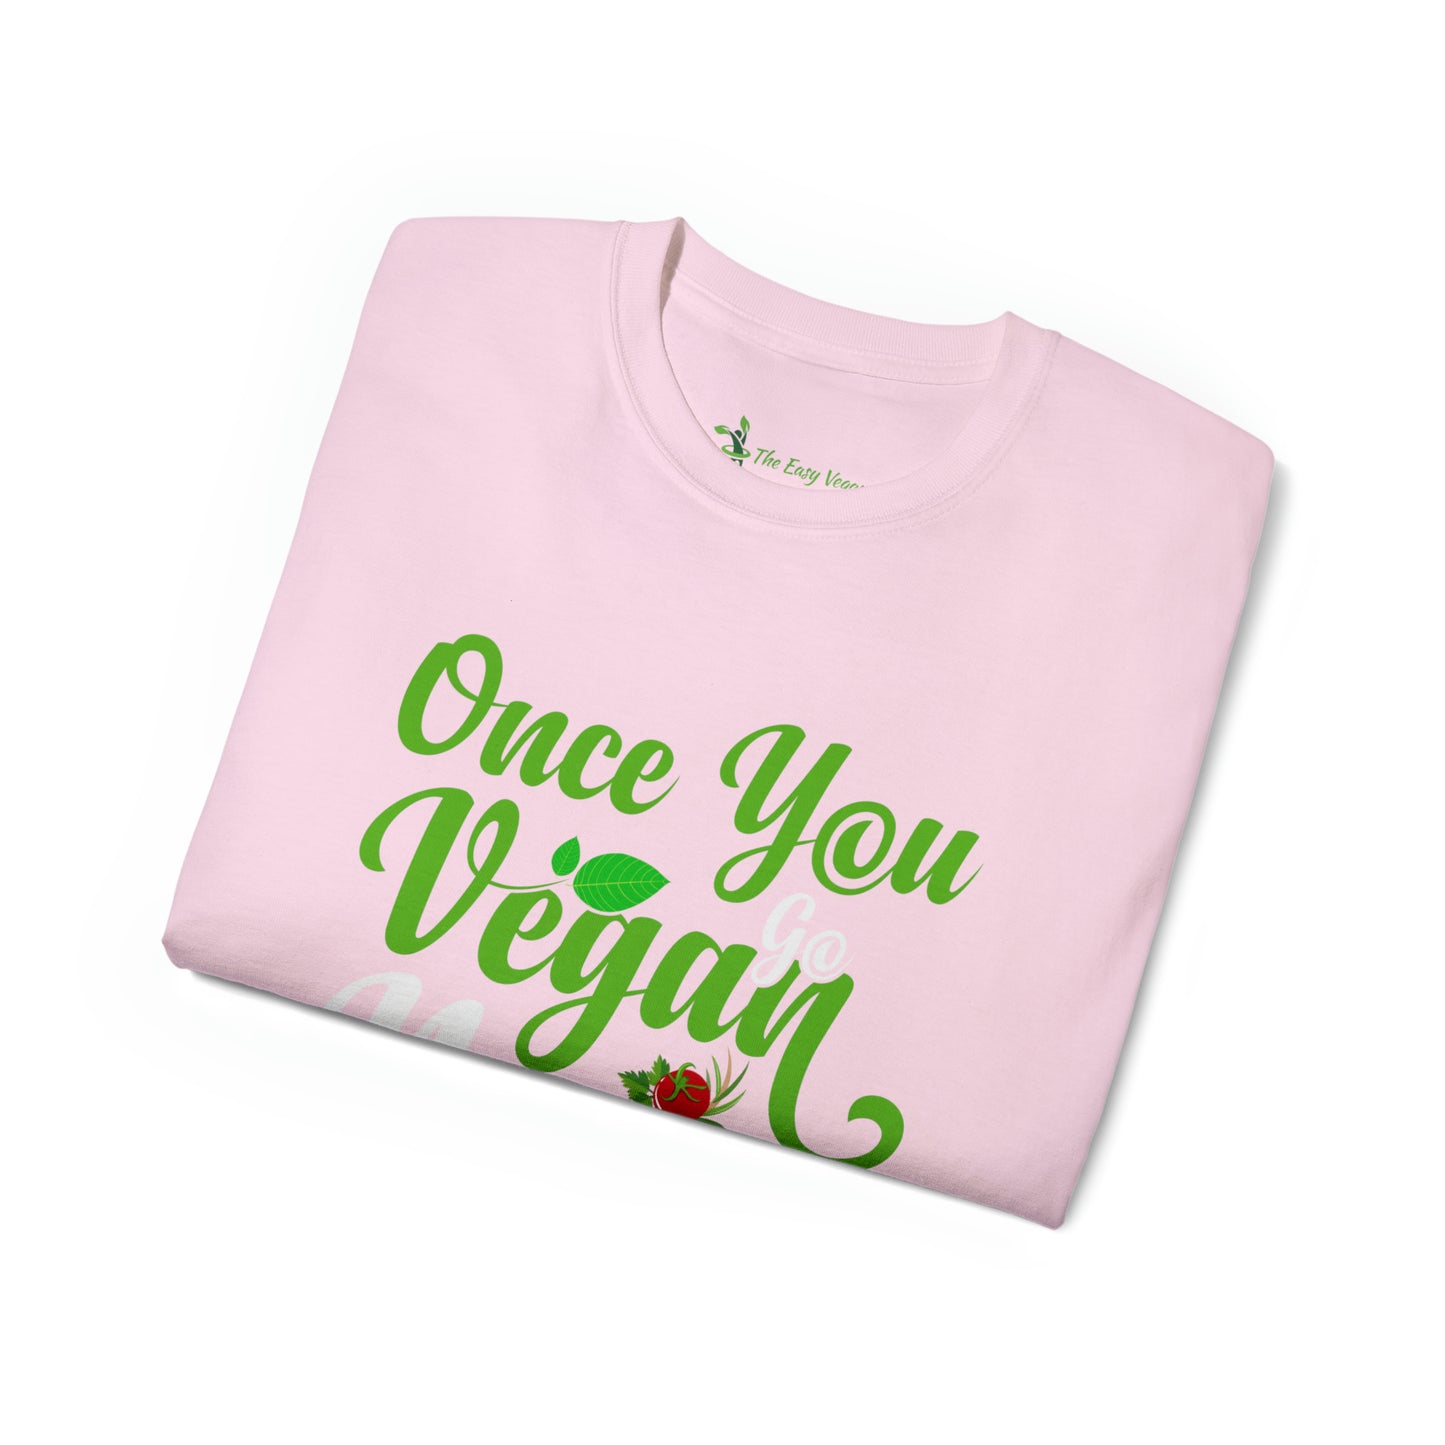 Once you Go Vegan you Never Go Back - Tee